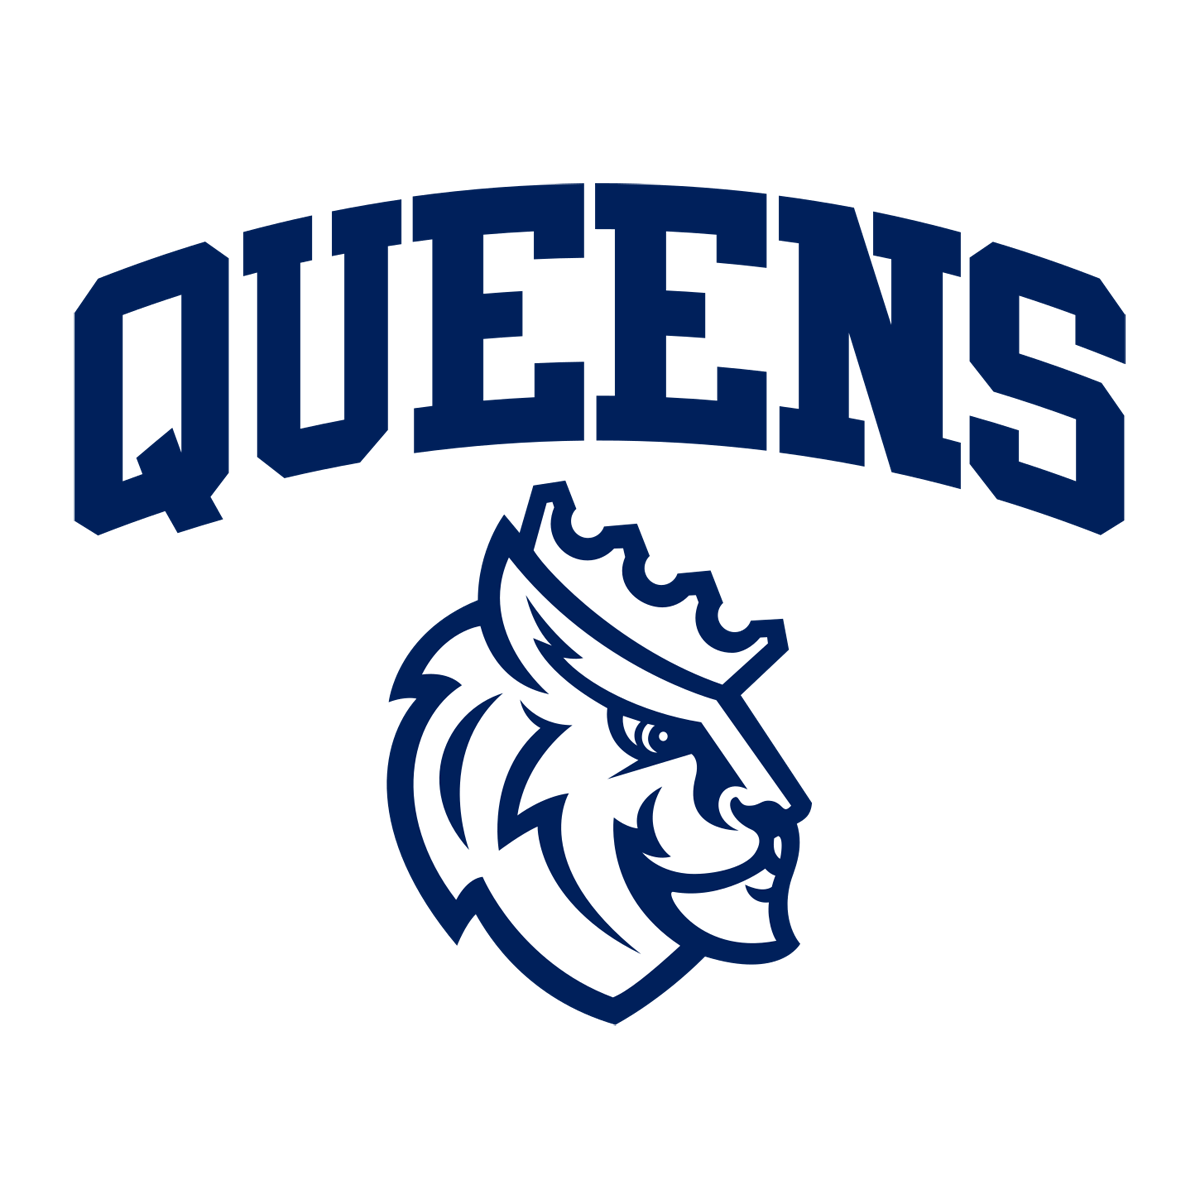 Queens University of Charlotte Royals logo PNG